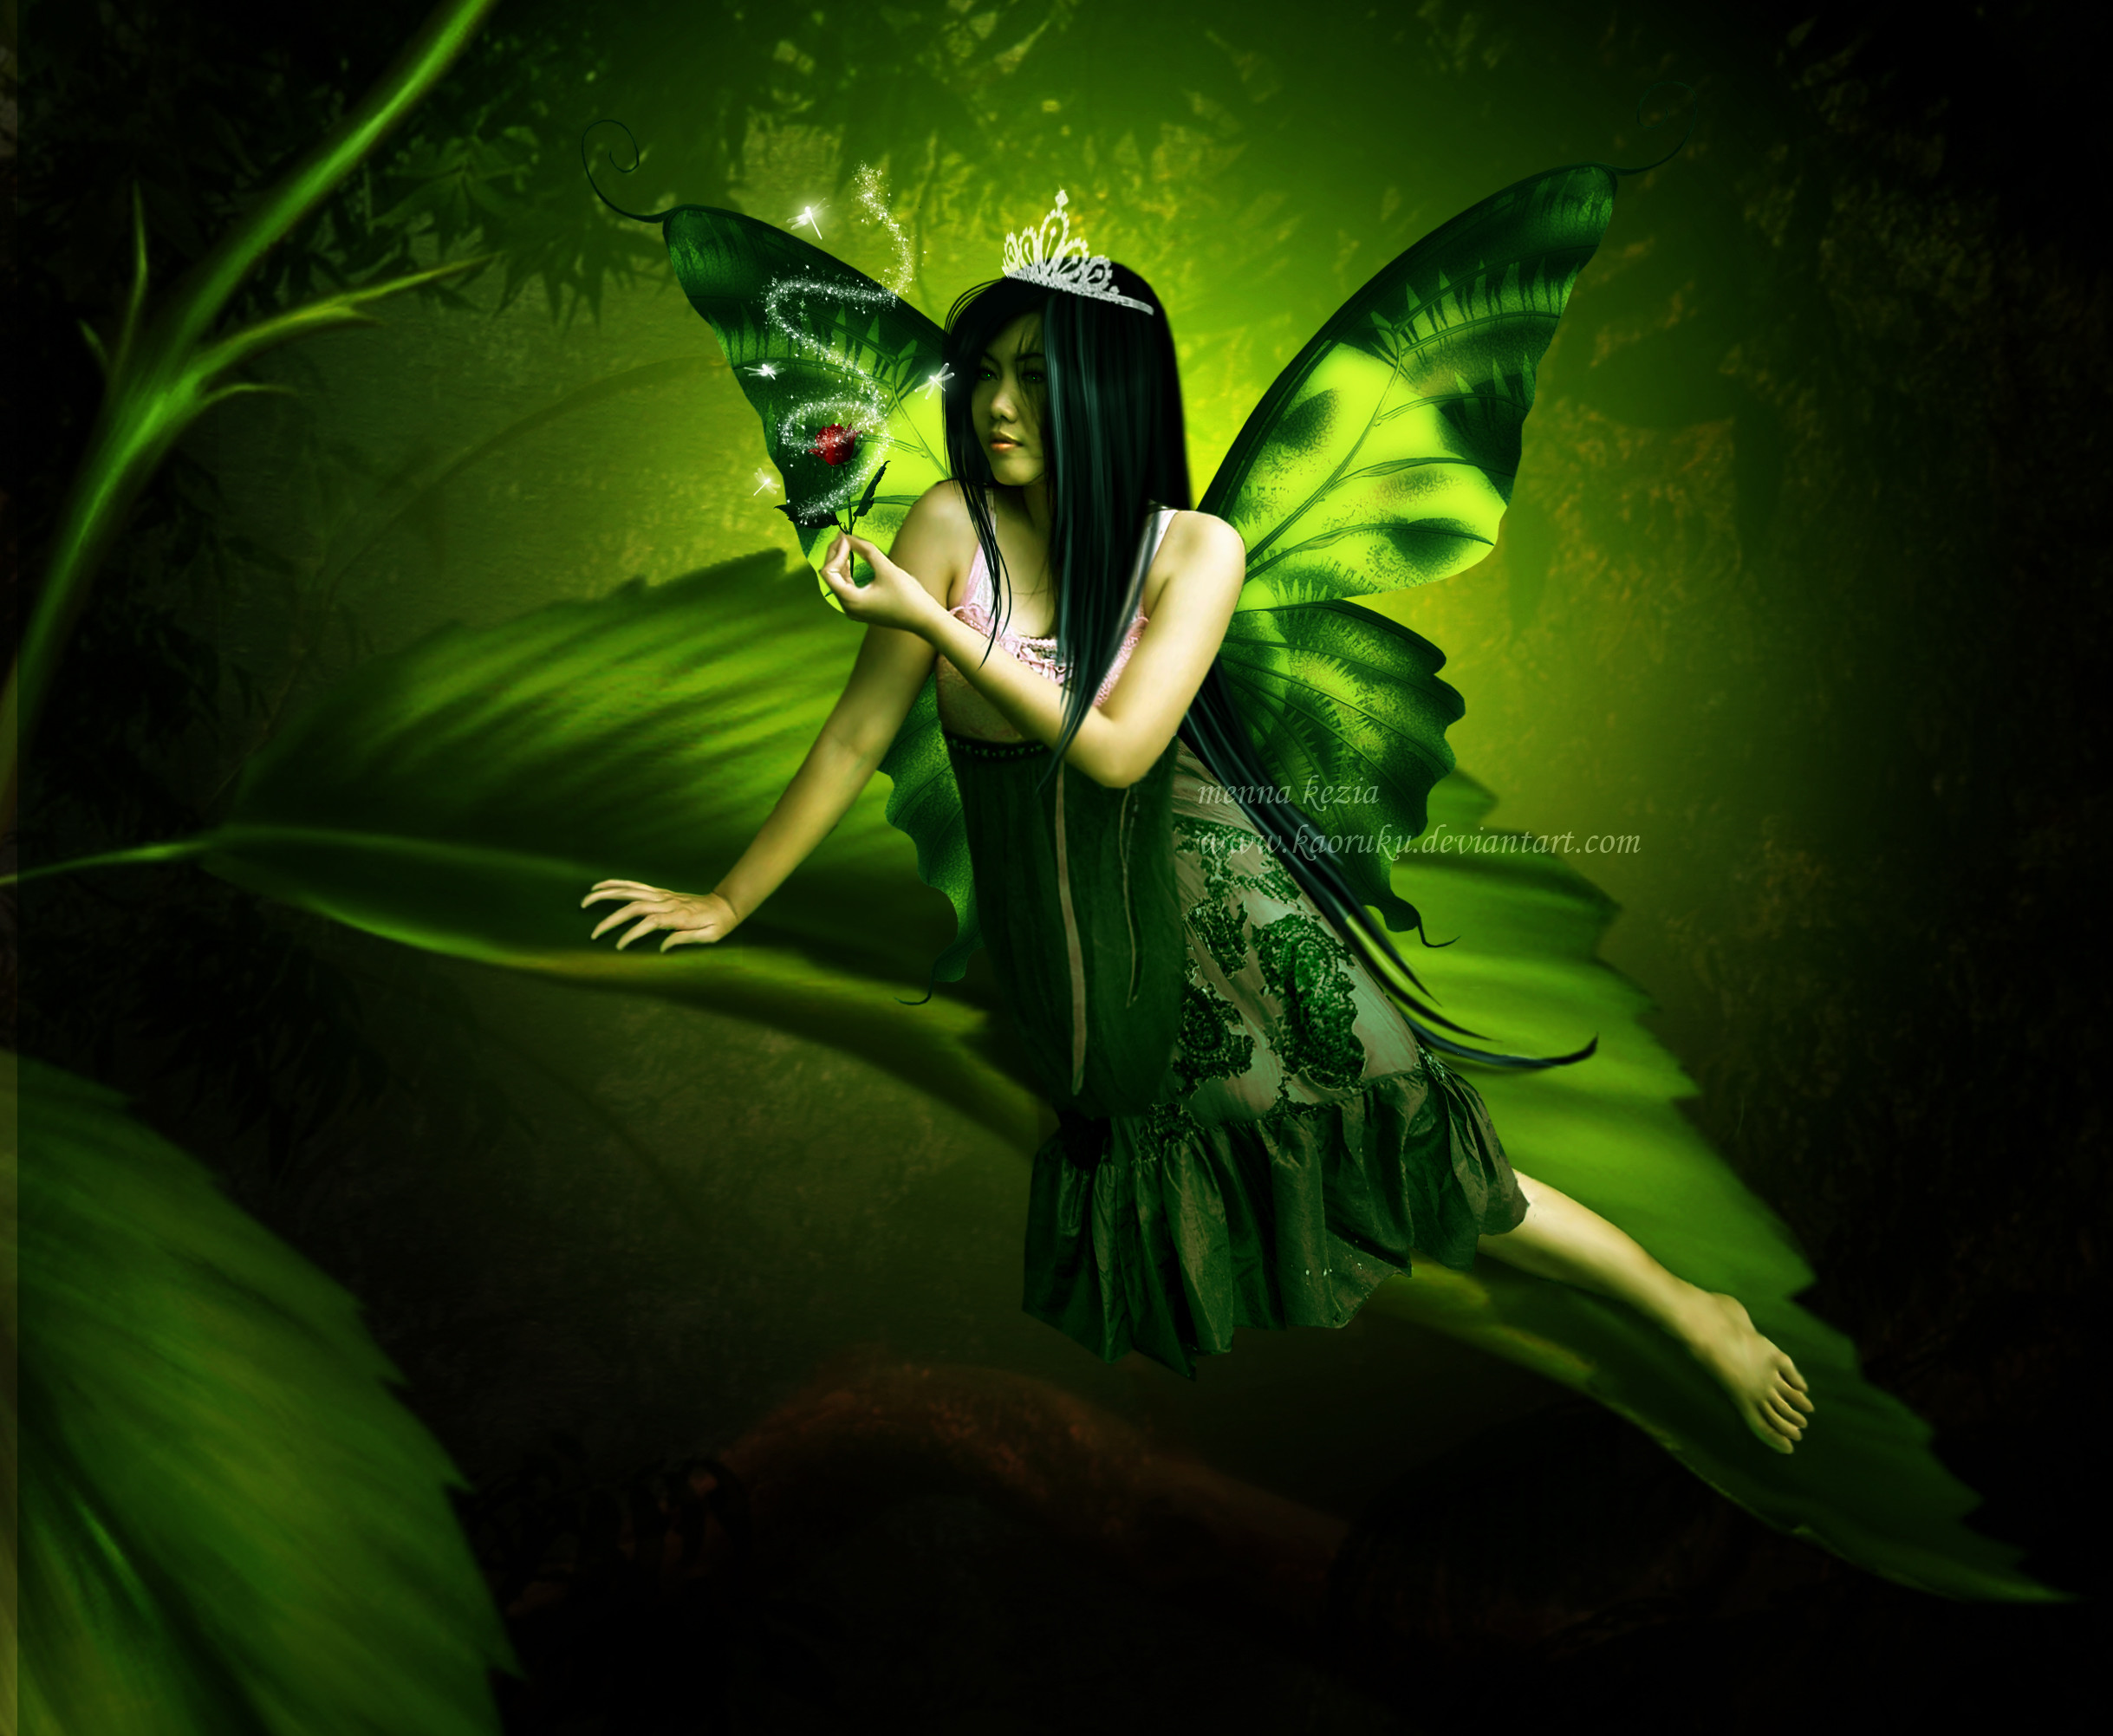 2438x2003 Search Results for “green fairy wallpaper” – Adorable Wallpapers